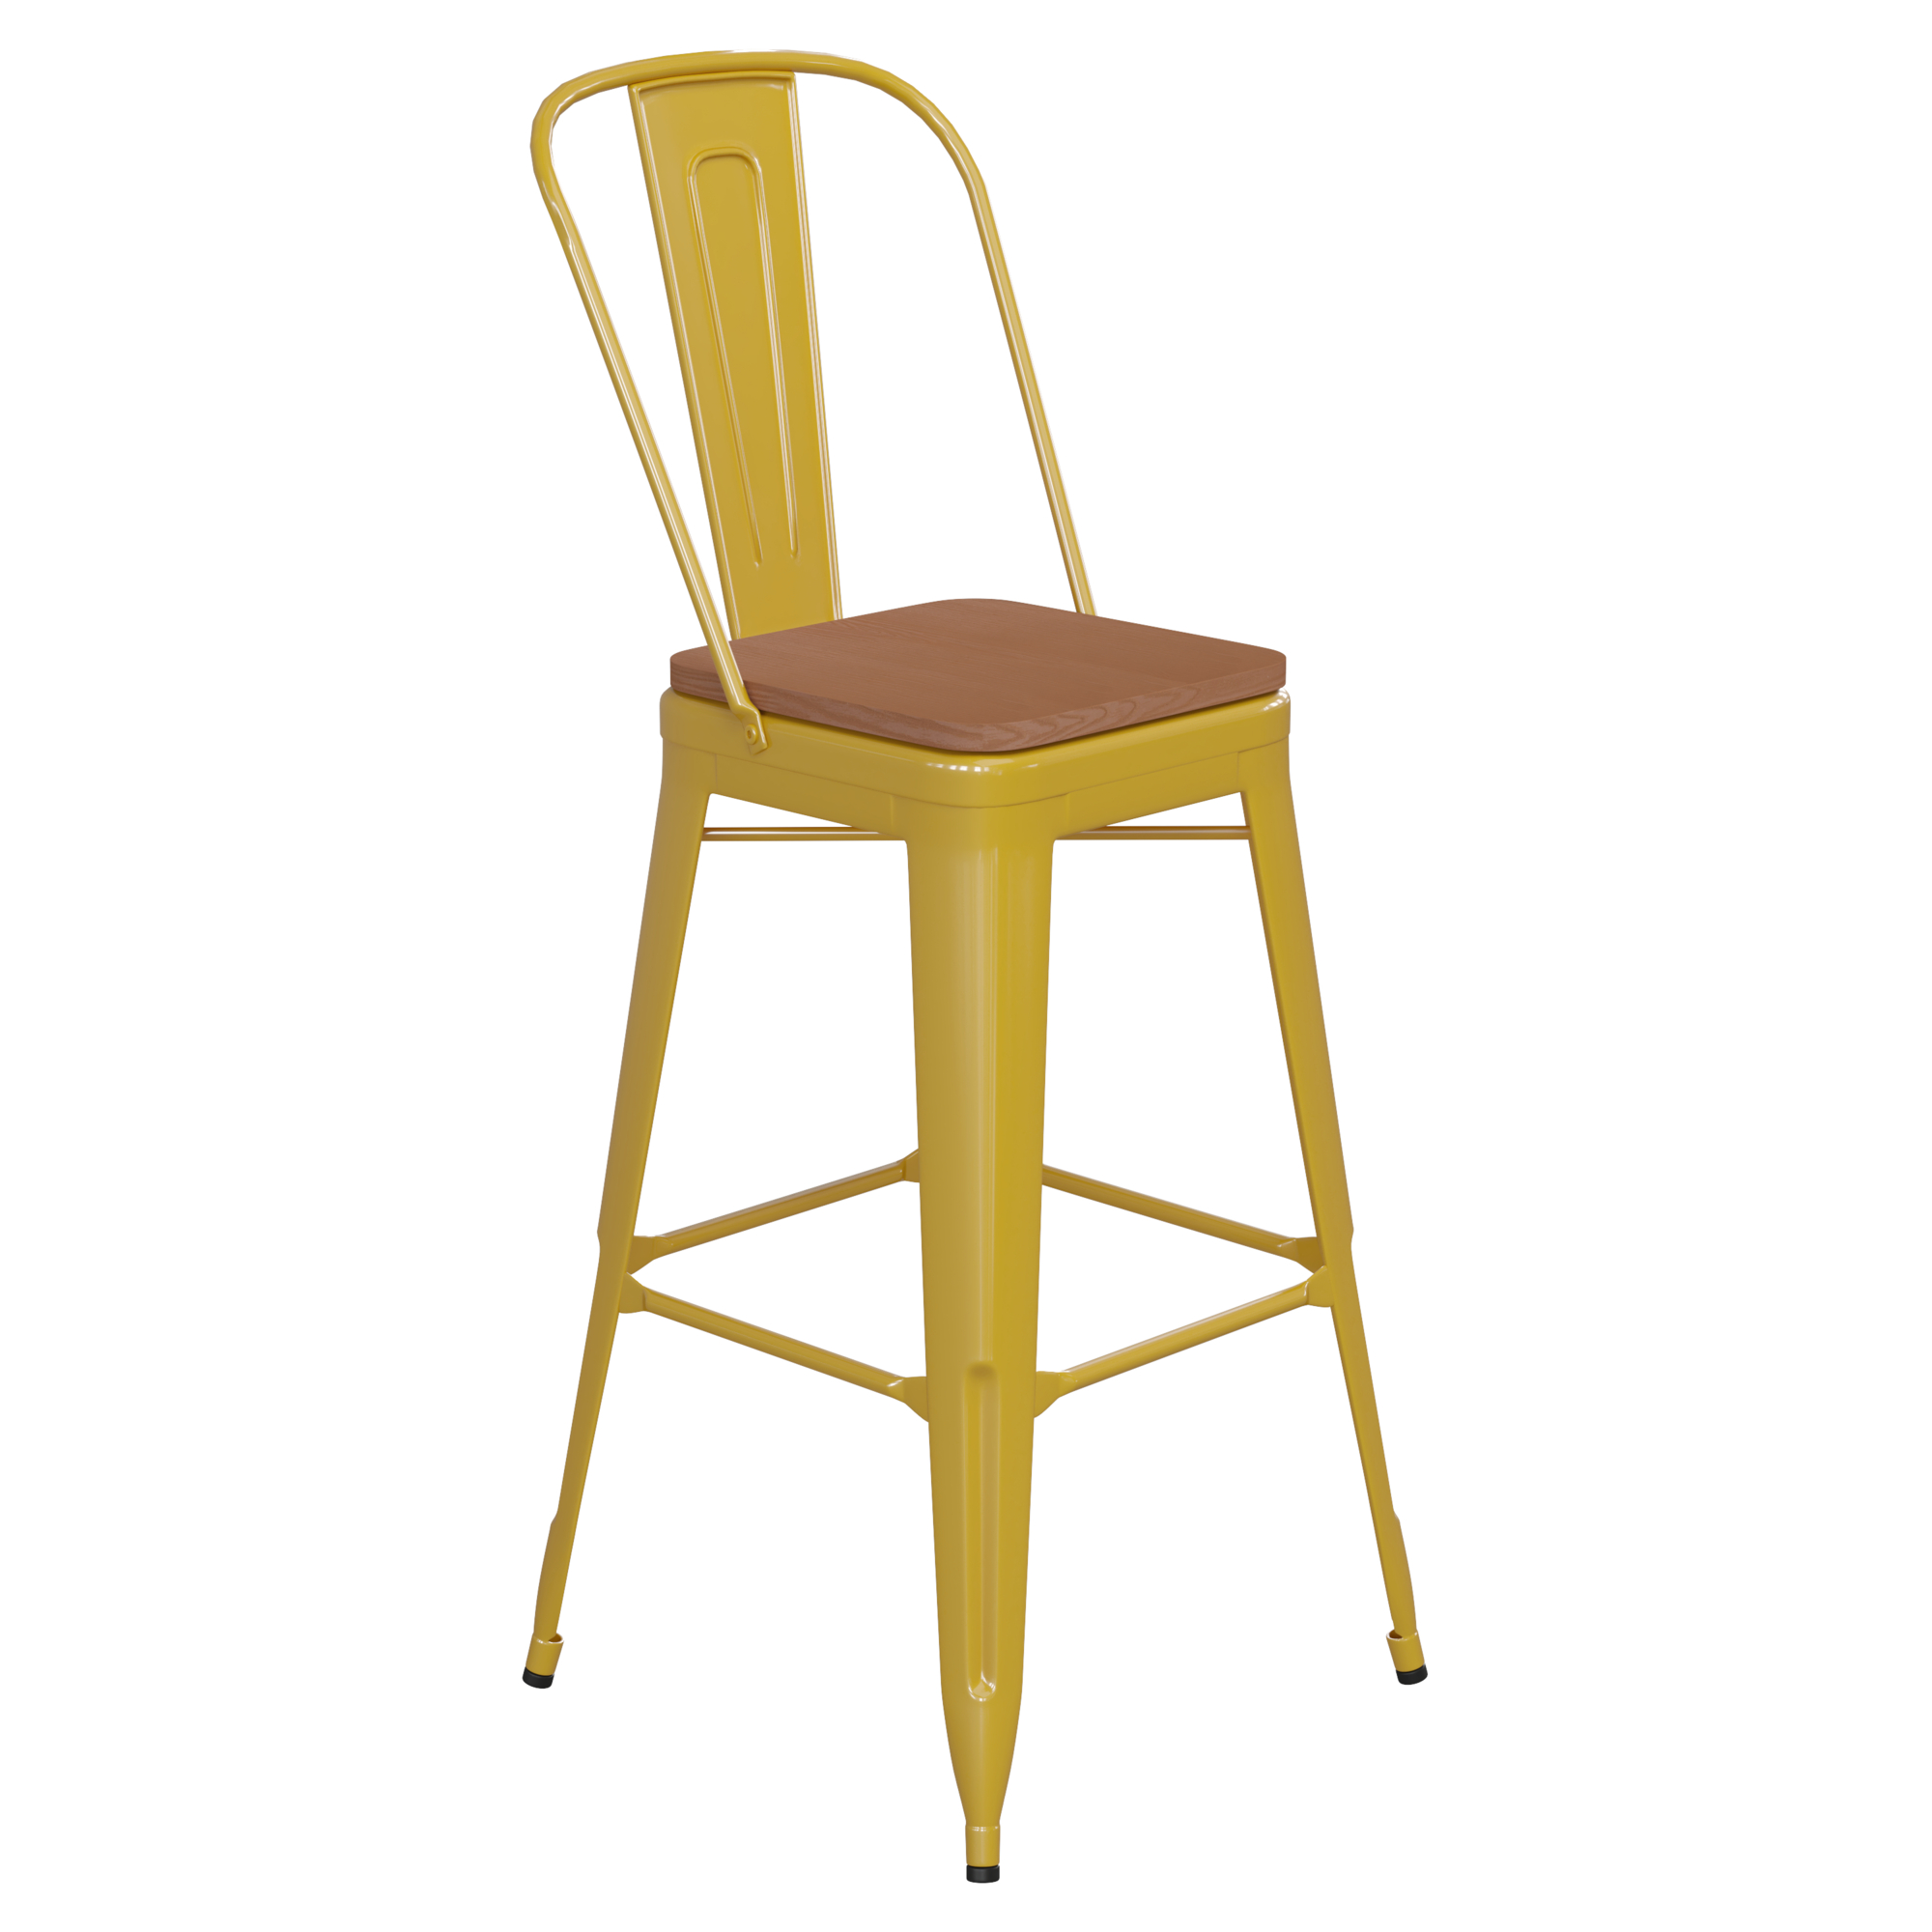 Flash Furniture, 30Inch Yellow Metal Counter Stool-Teak Poly Seat, Primary Color Yellow, Included (qty.) 1, Model CH3132030GYLP2T